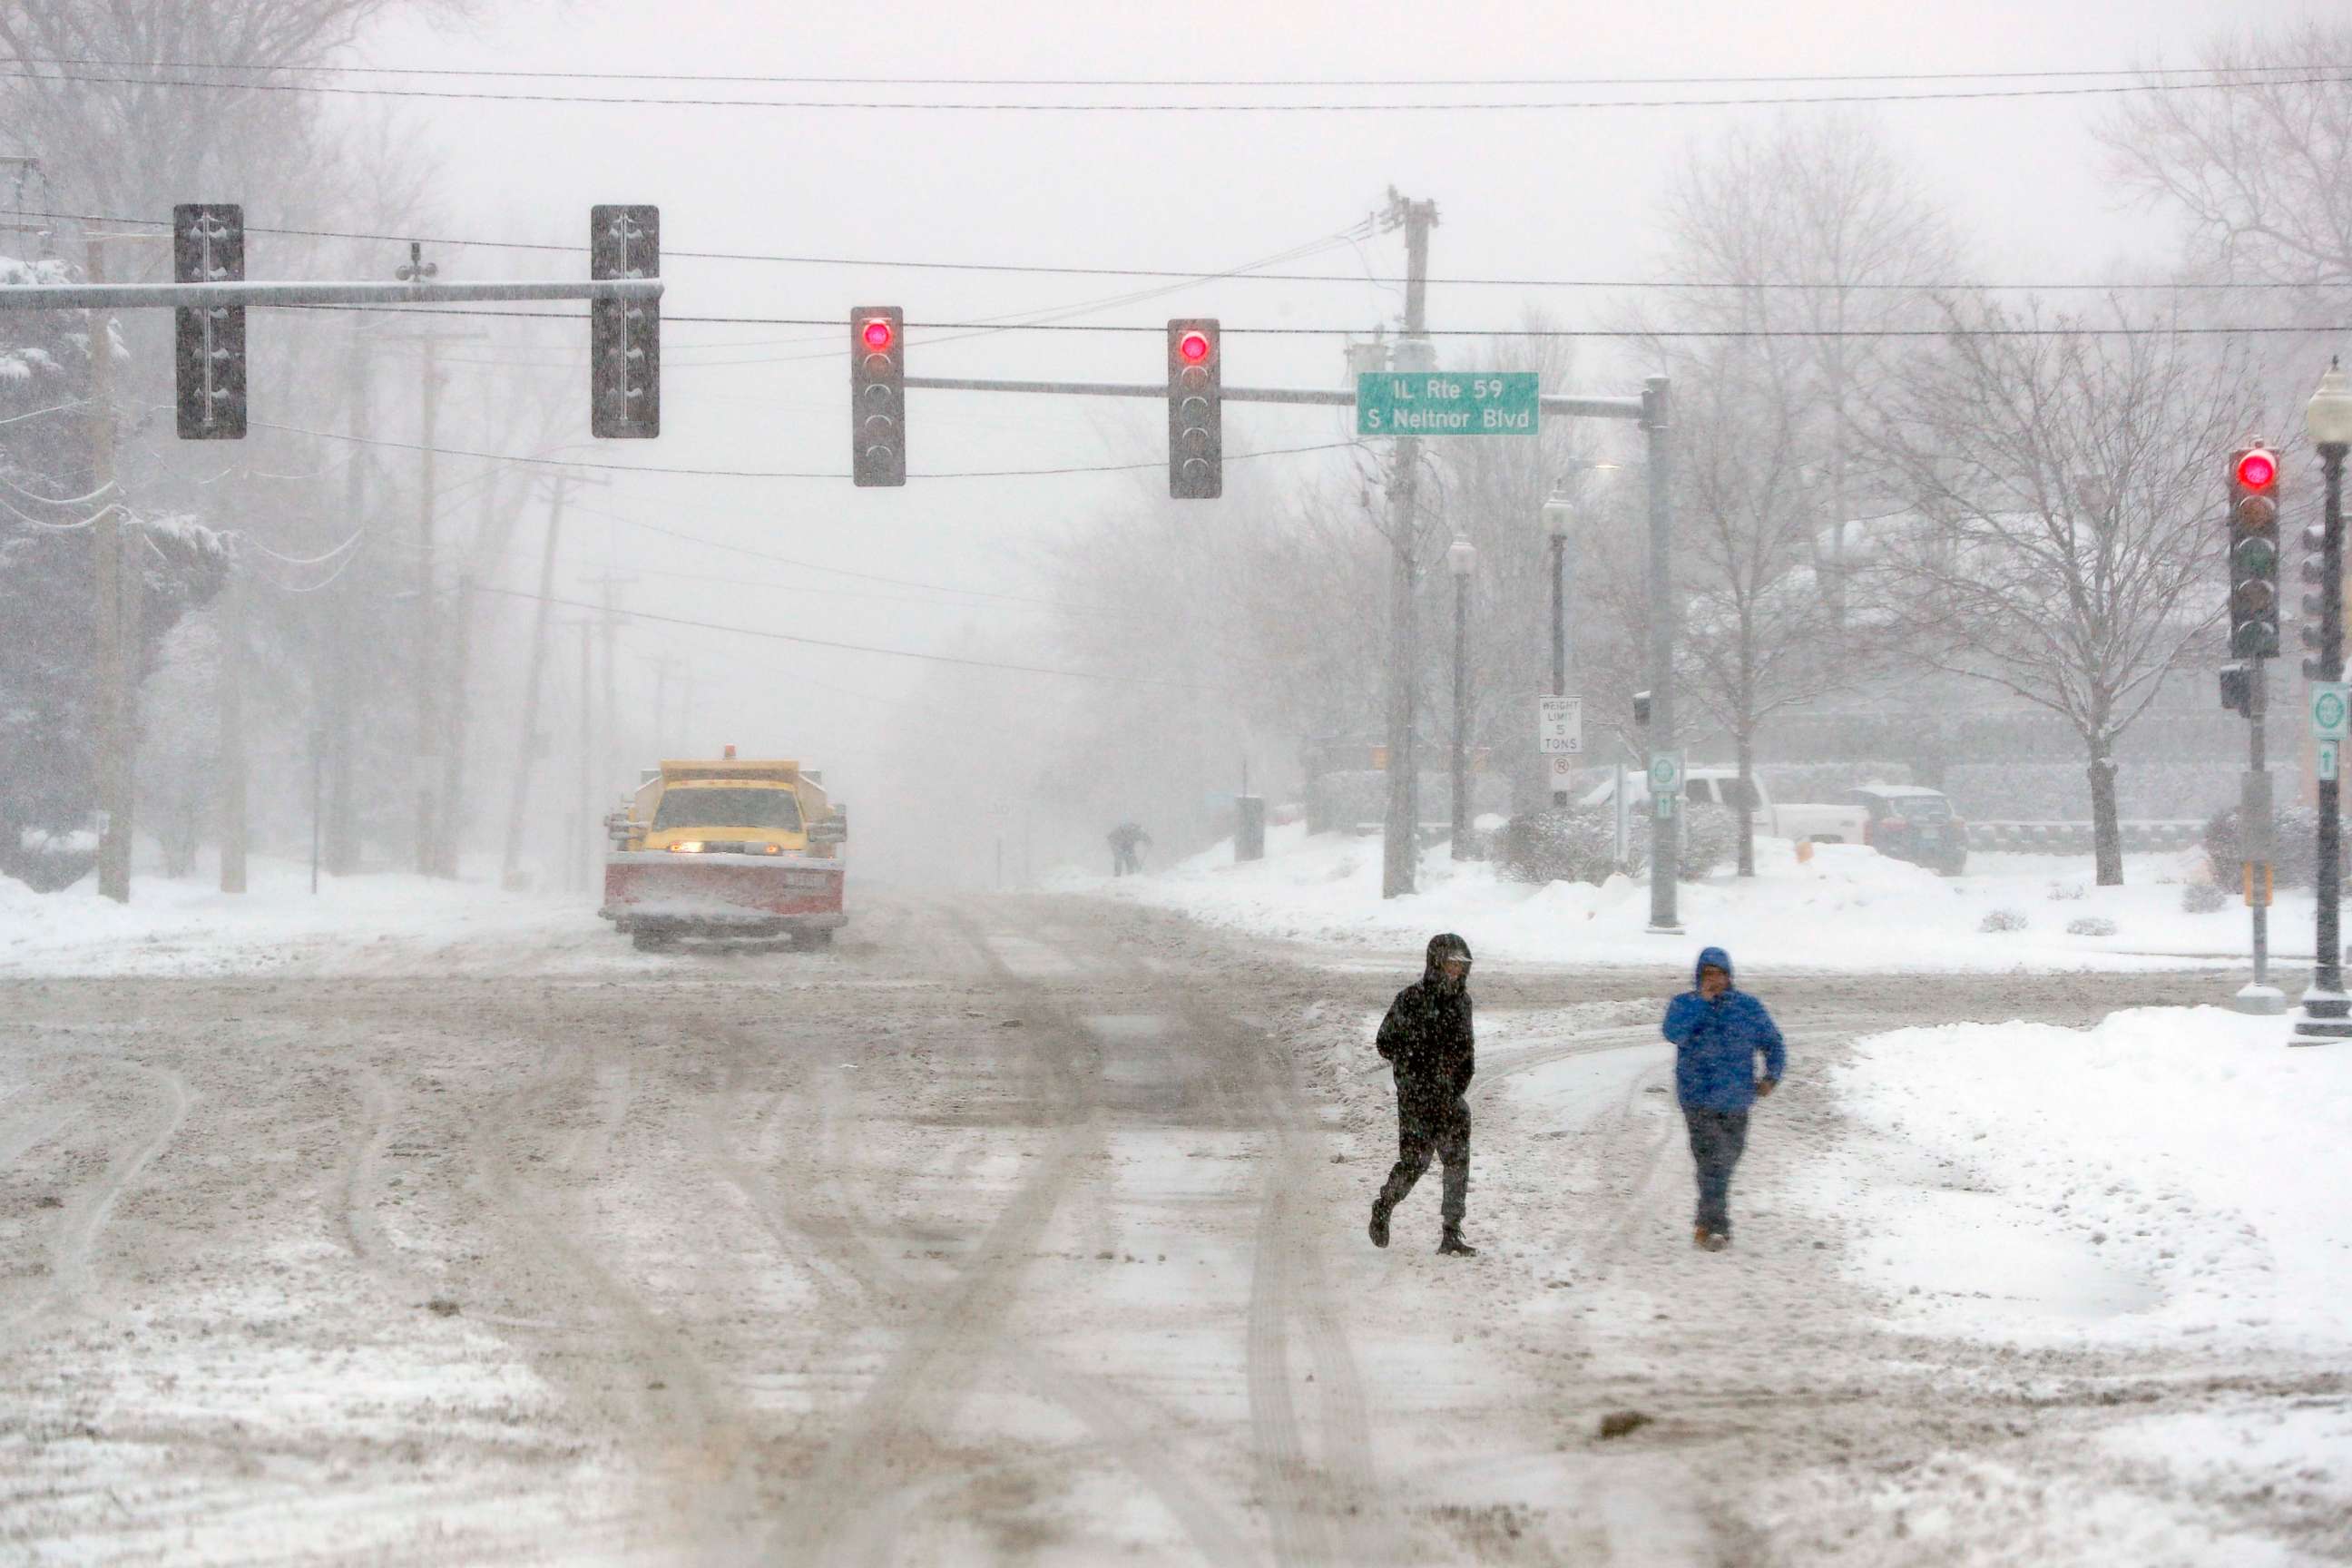 PHOTO: Two unidentified men cross the street after heavy snow fall on Jan. 26, 2021, in West Chicago, U.S.